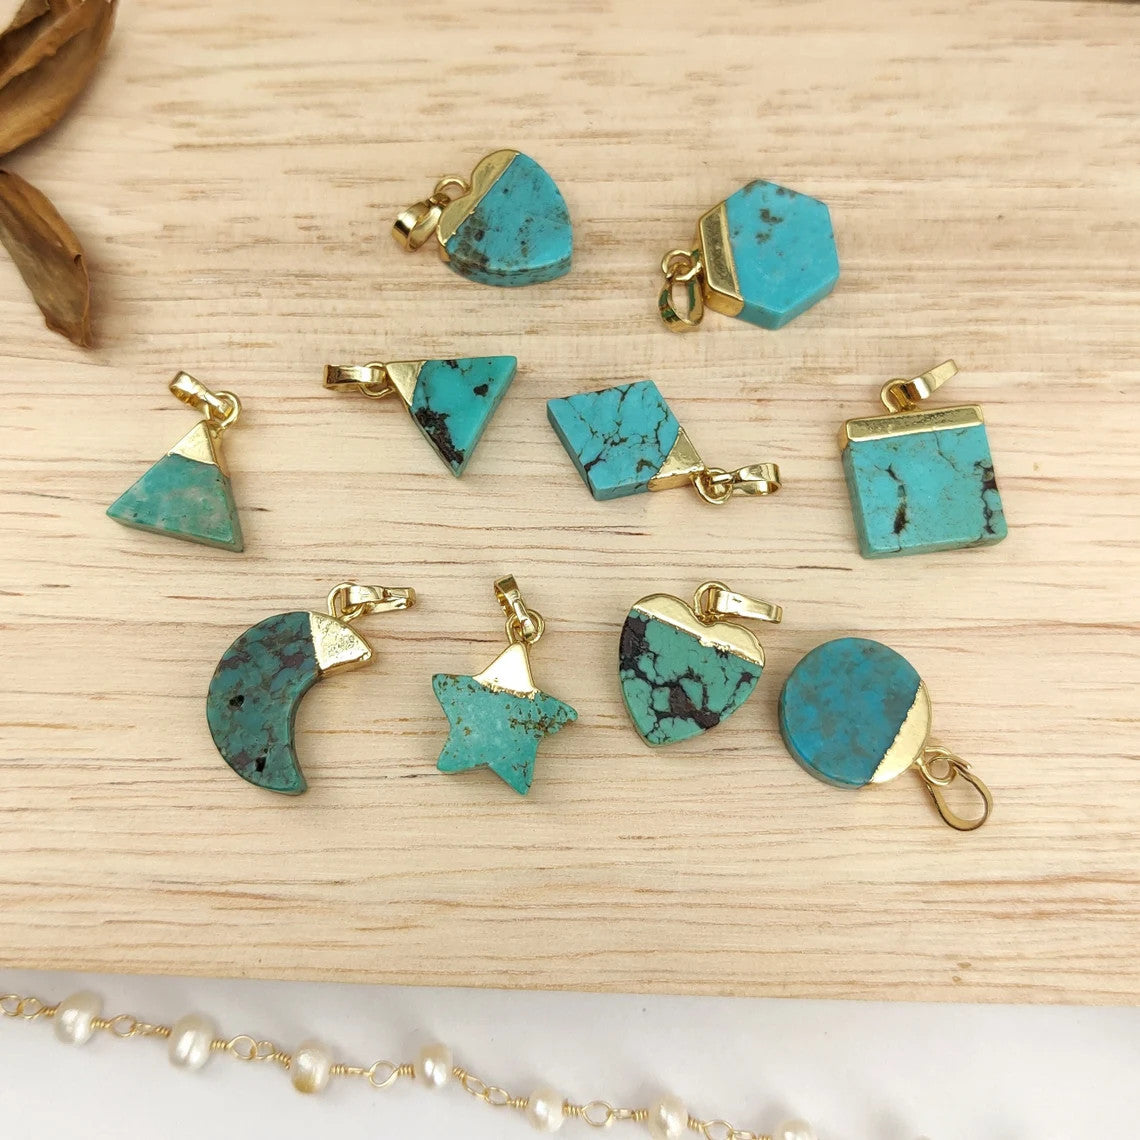 Multi Shapes Natural Turquoise Gemstone Pendant in Gold Plated, For Jewelry Making G2076